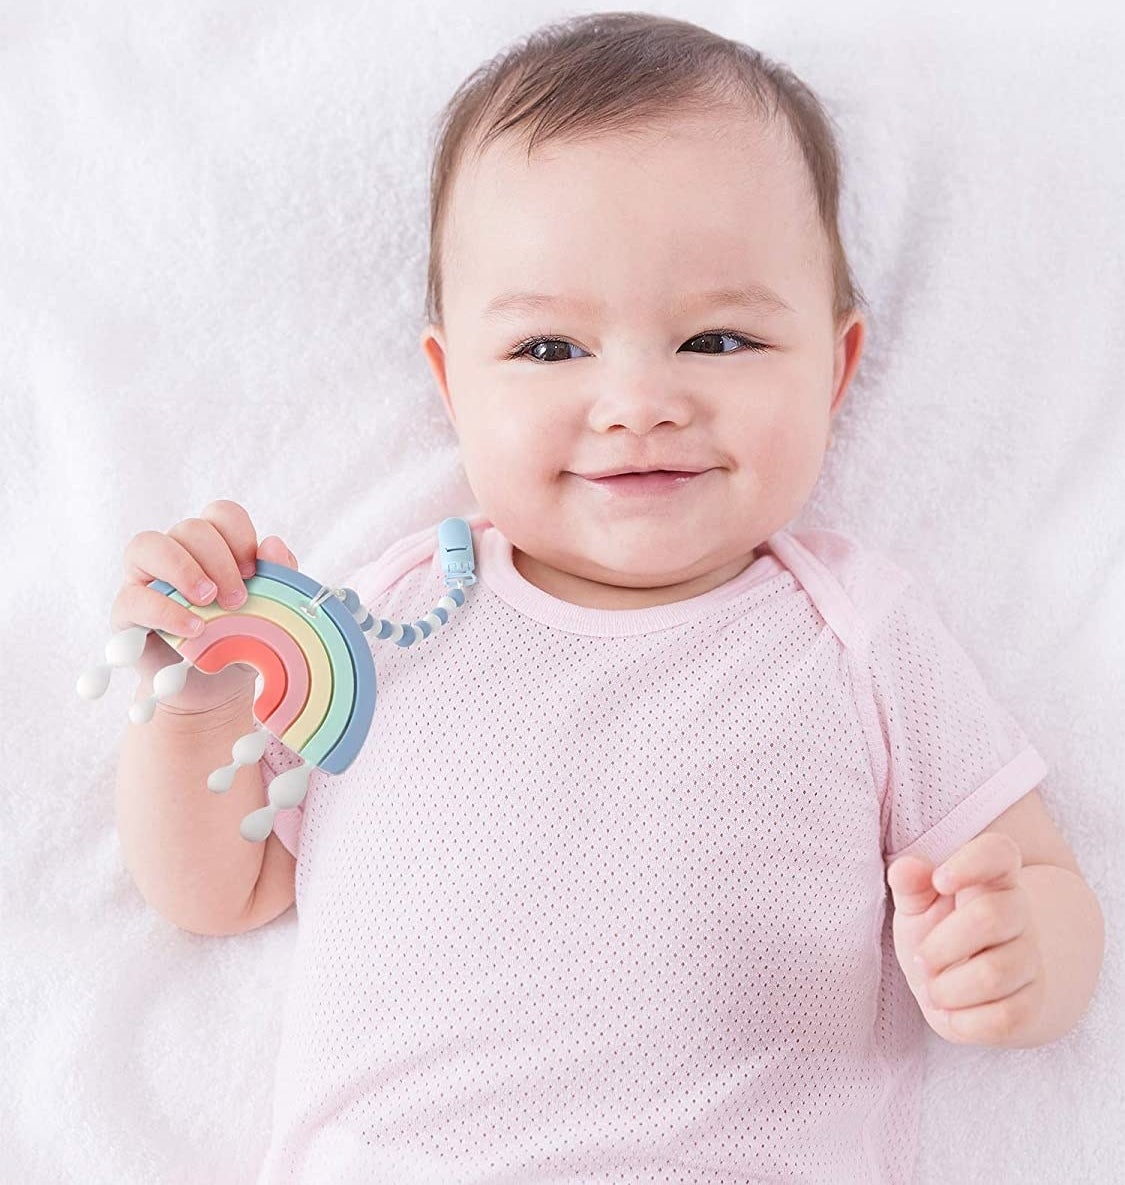 a baby with a rainbow teether clipped to their shirt